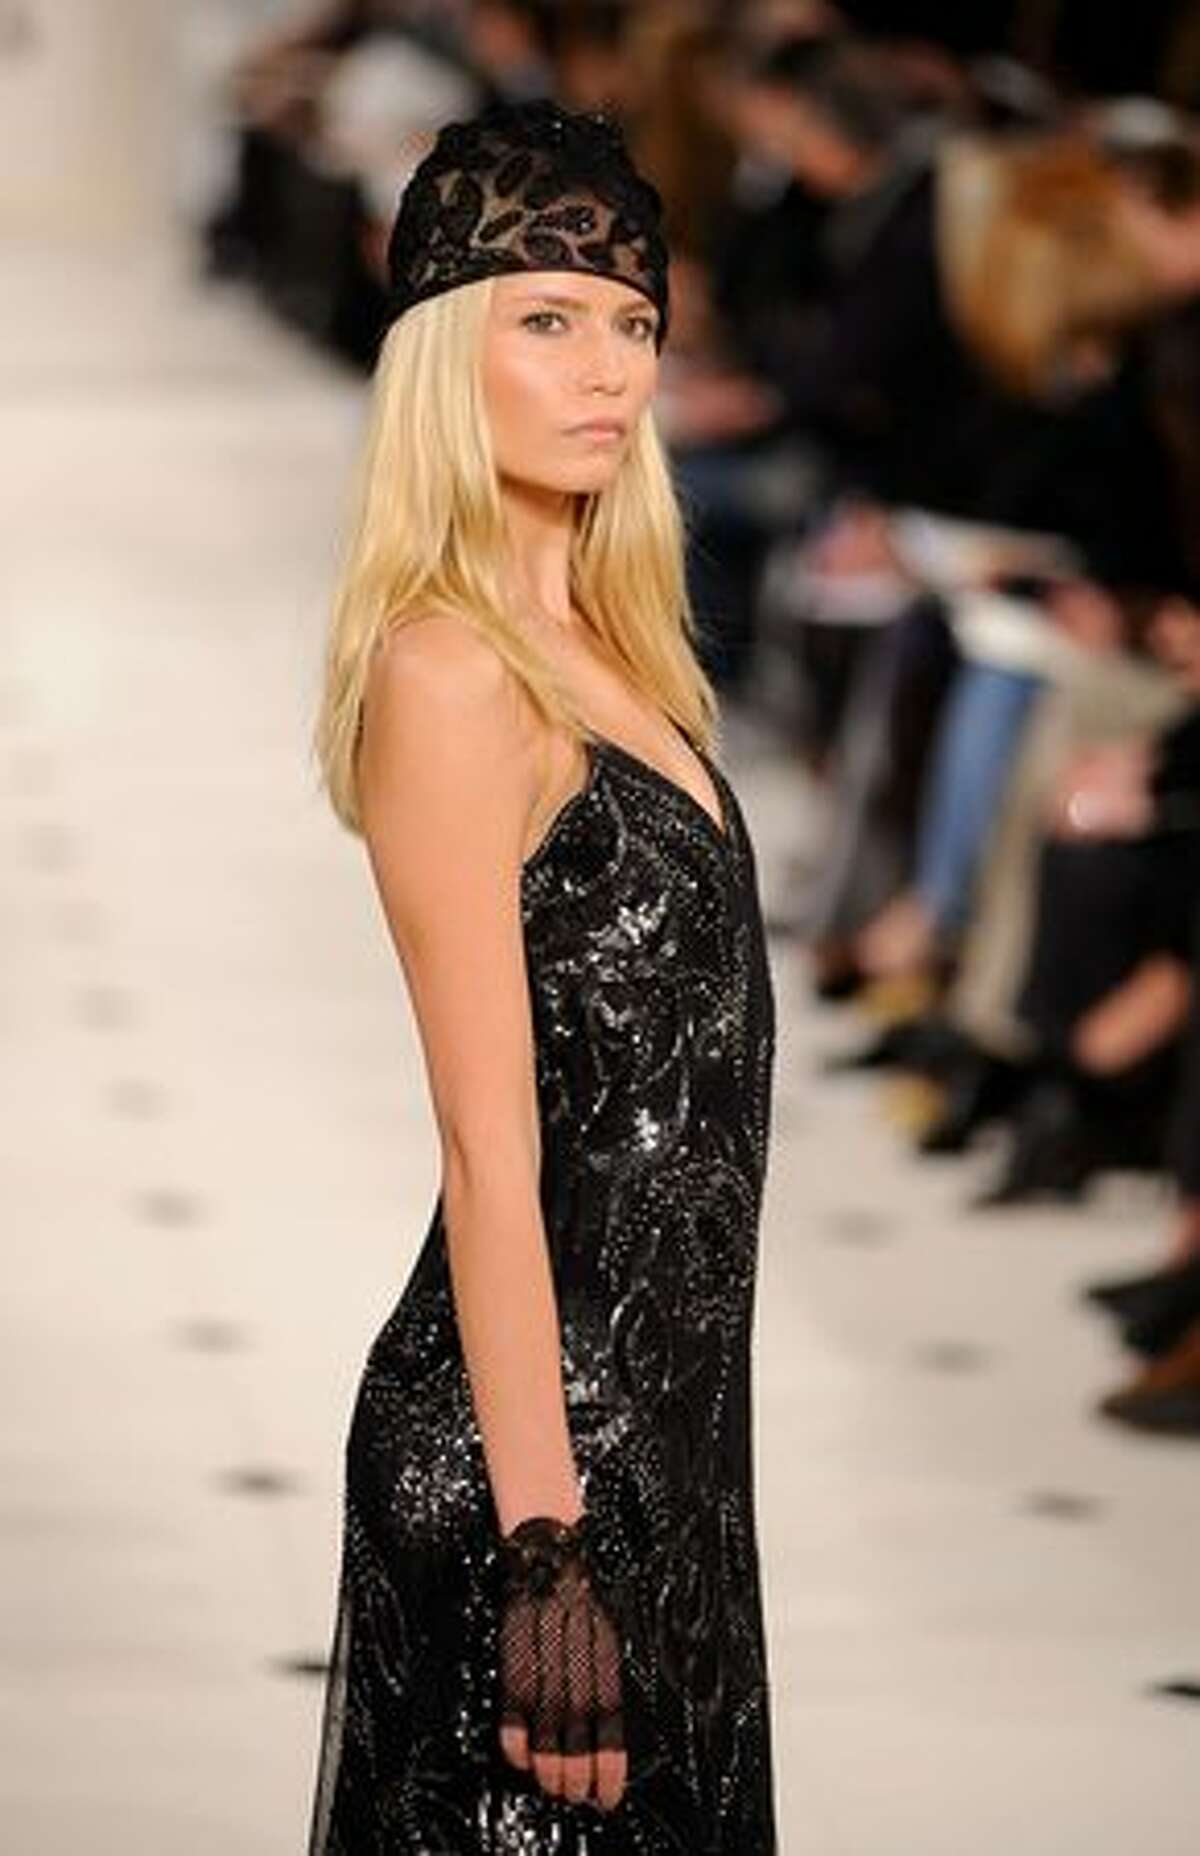 A model walks the runway at the Ralph Lauren Collection Fall 2010 Fashion Show during Mercedes-Benz Fashion Week at 275 Hudson Street in New York on Thursday, Feb. 18, 2010.